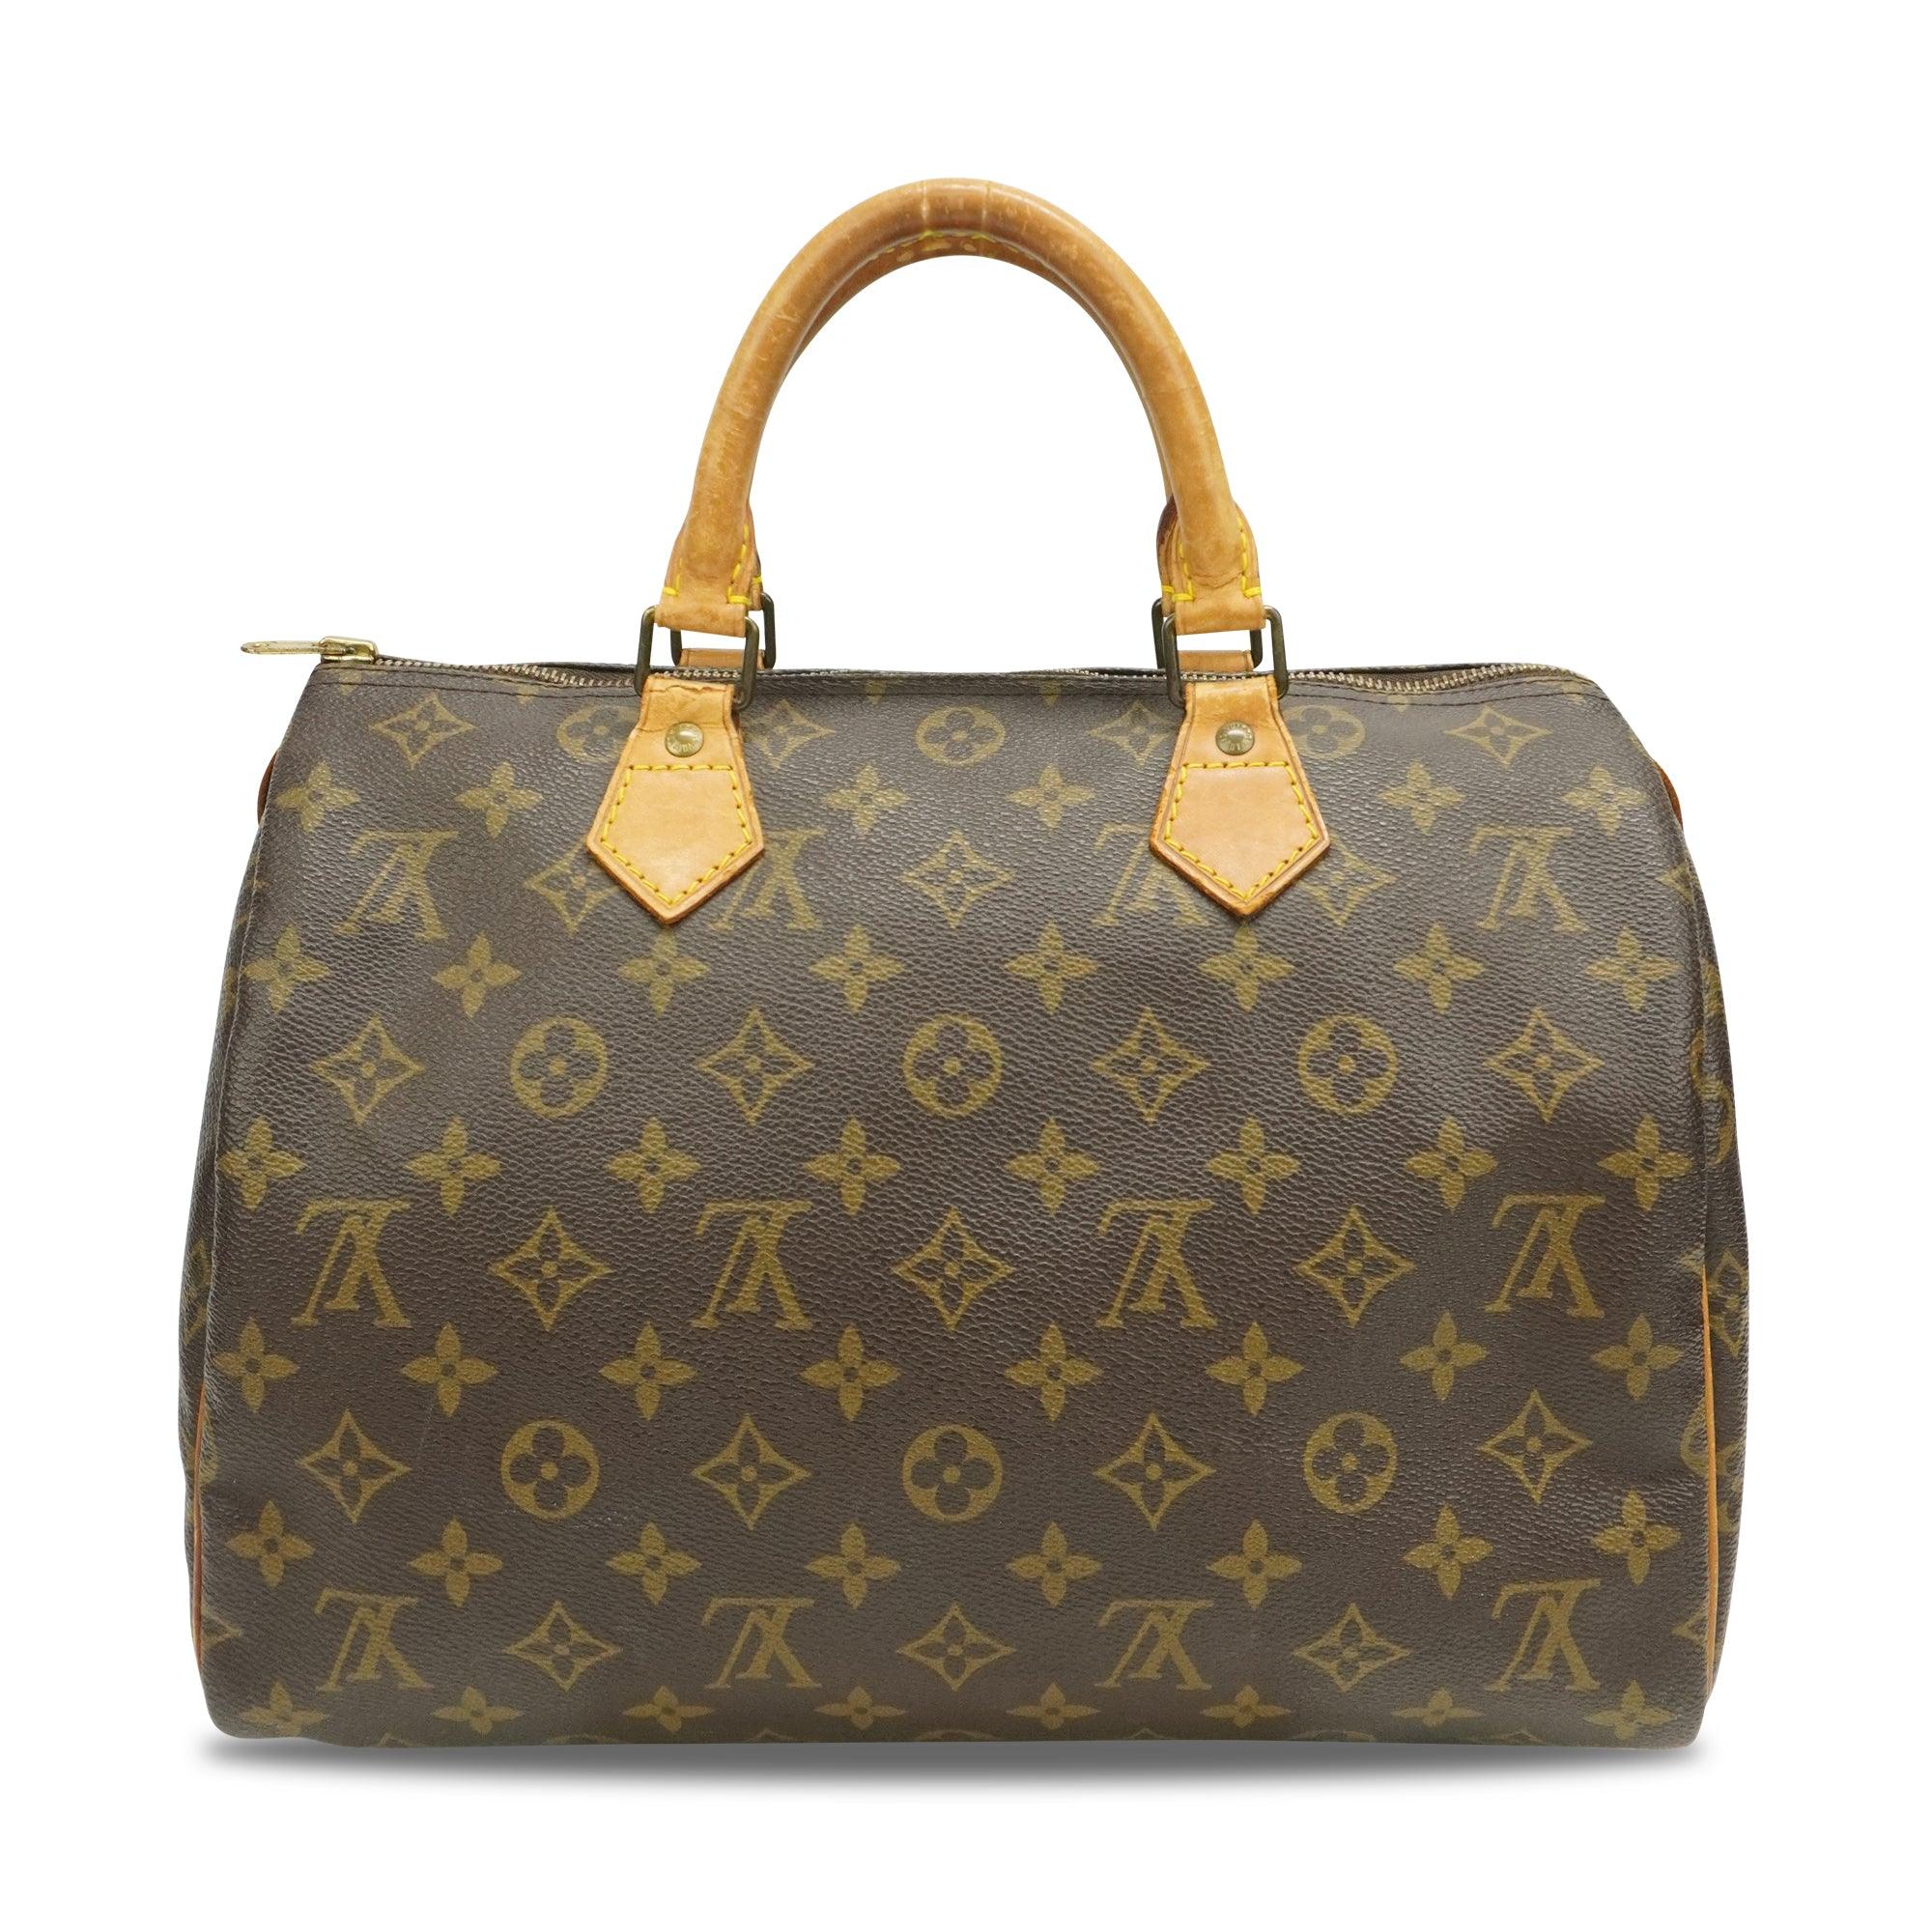 Louis Vuitton 'Speedy 30' Bag - Fashionably Yours